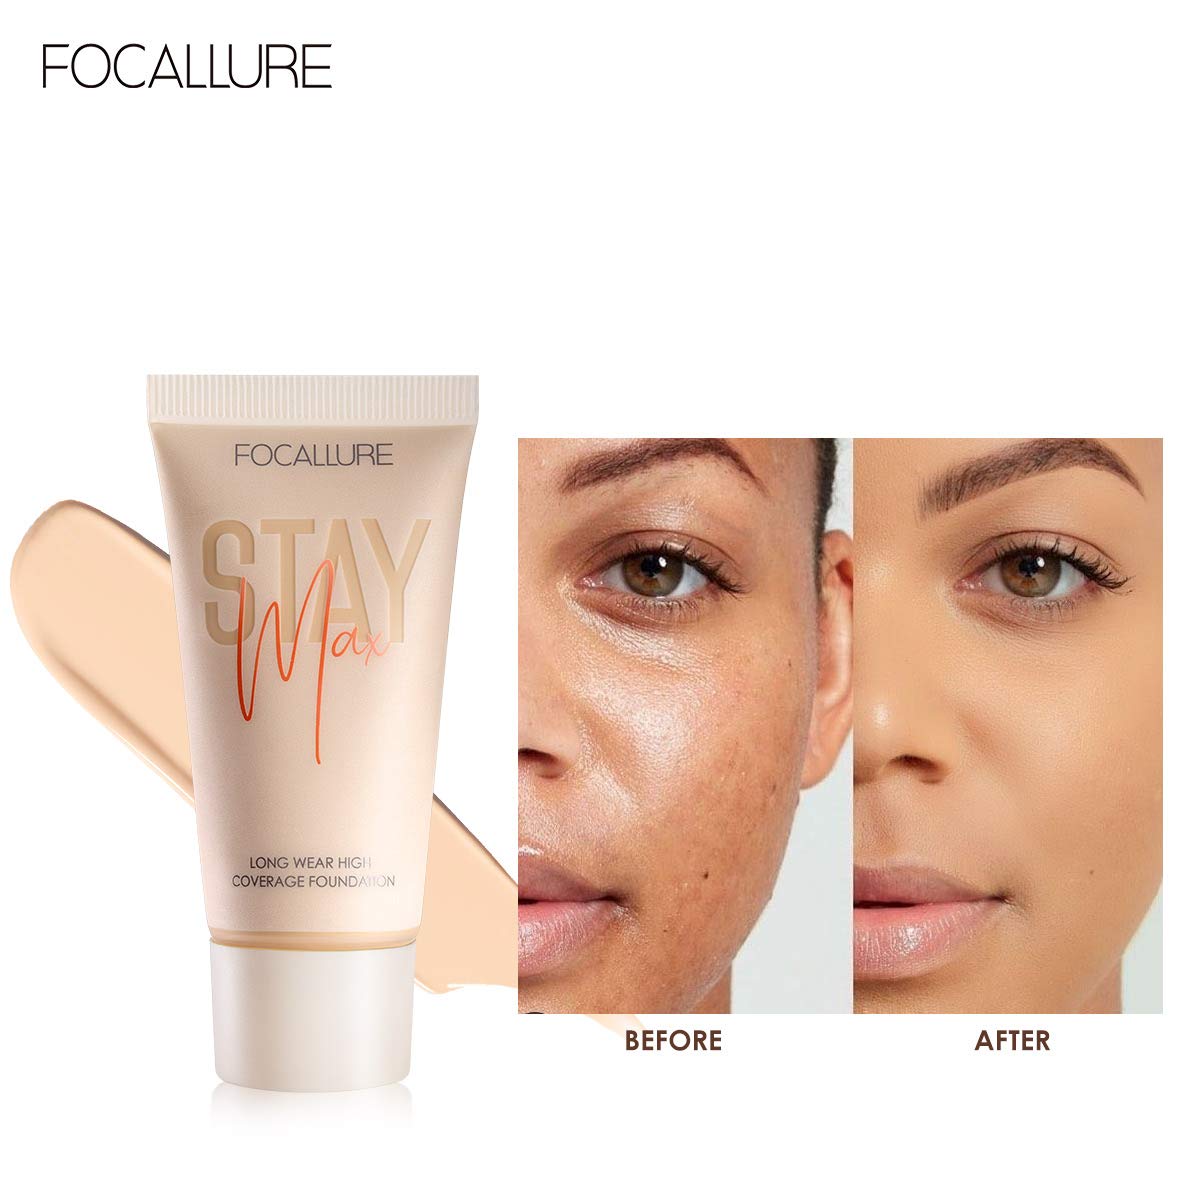  Focallure Matte Liquid Foundation with Pore-Blurring Primer 2 Pcs Makeup Set Lasting Color Waterproof Smooth Cruelty Free Matte Flawless Foundation-#3 CREAM